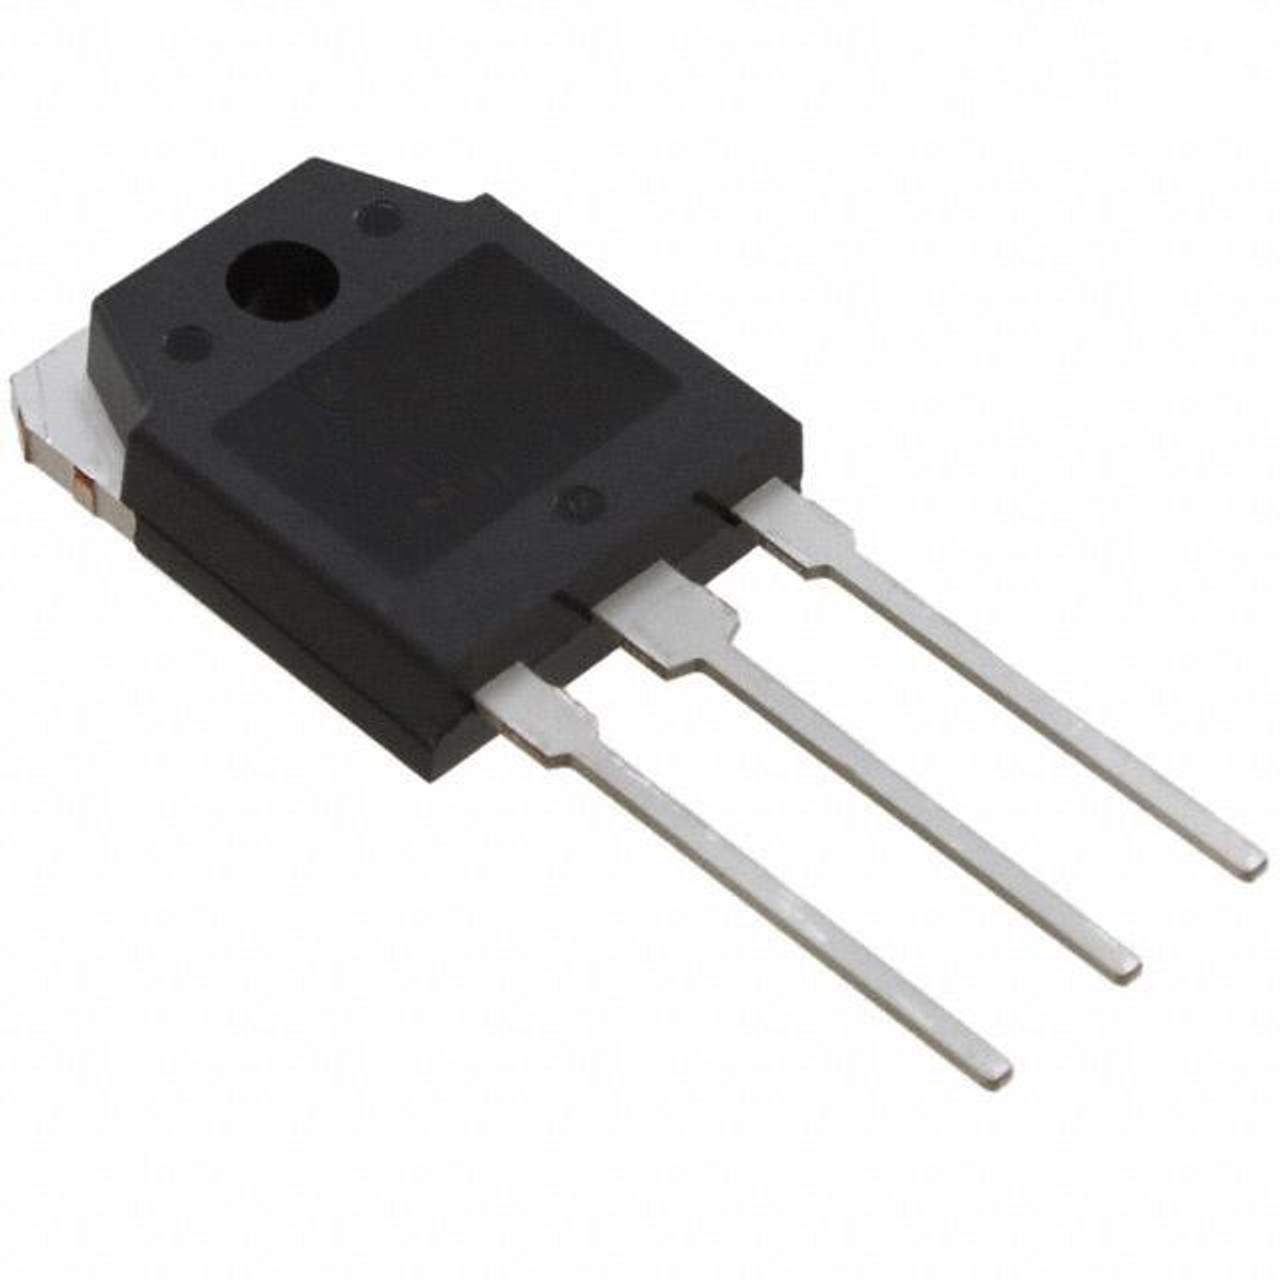 FGA25N120ANTD ; Transistor IGBT with Diode 1200V 25A 50A 312W, TO-3P GCE